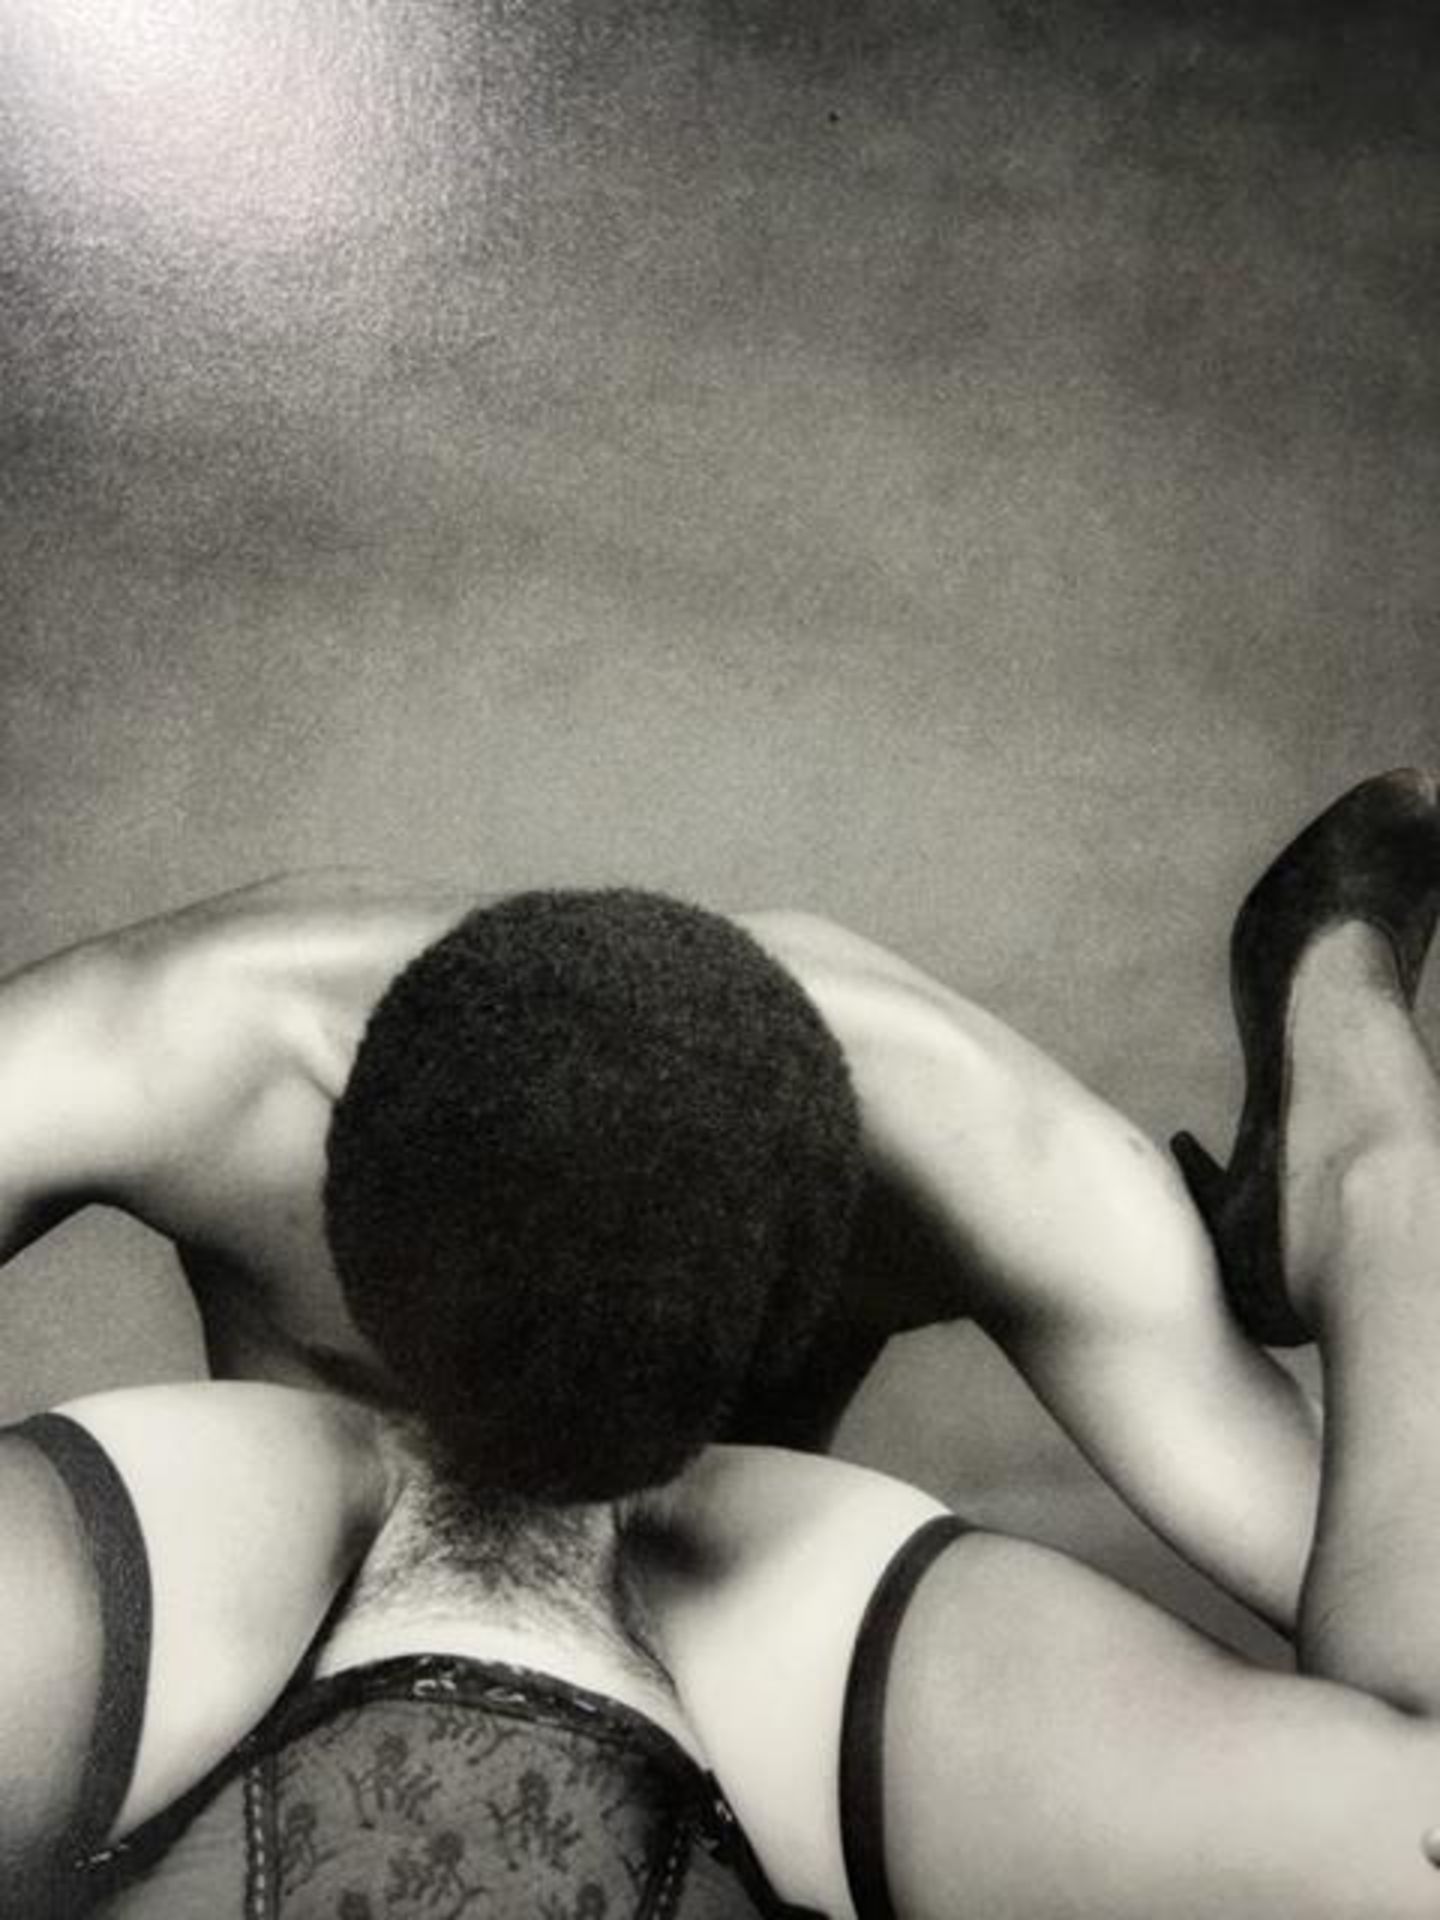 Robert Mapplethorpe "Marty and Veronica" Print. - Image 6 of 6